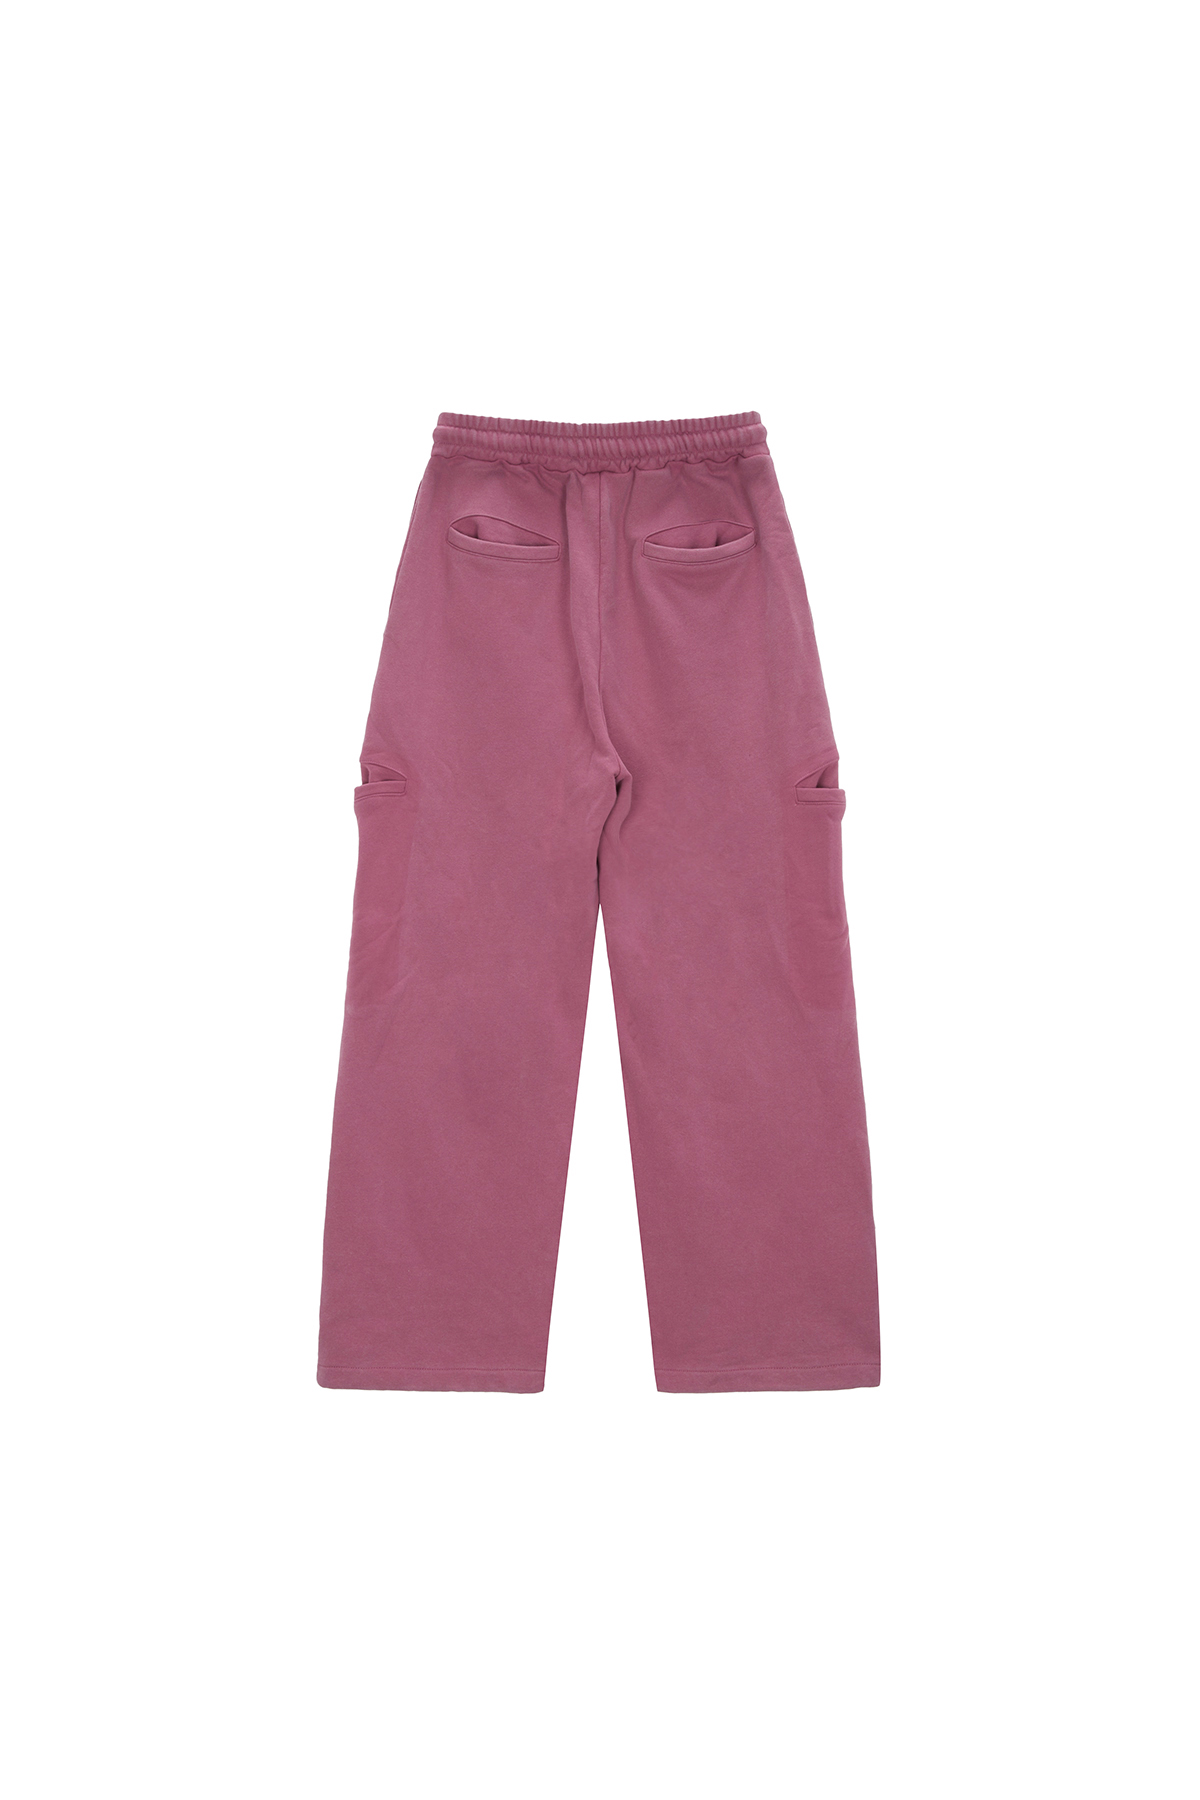 PIGMENT DYING SWEATPANTS IN PINK